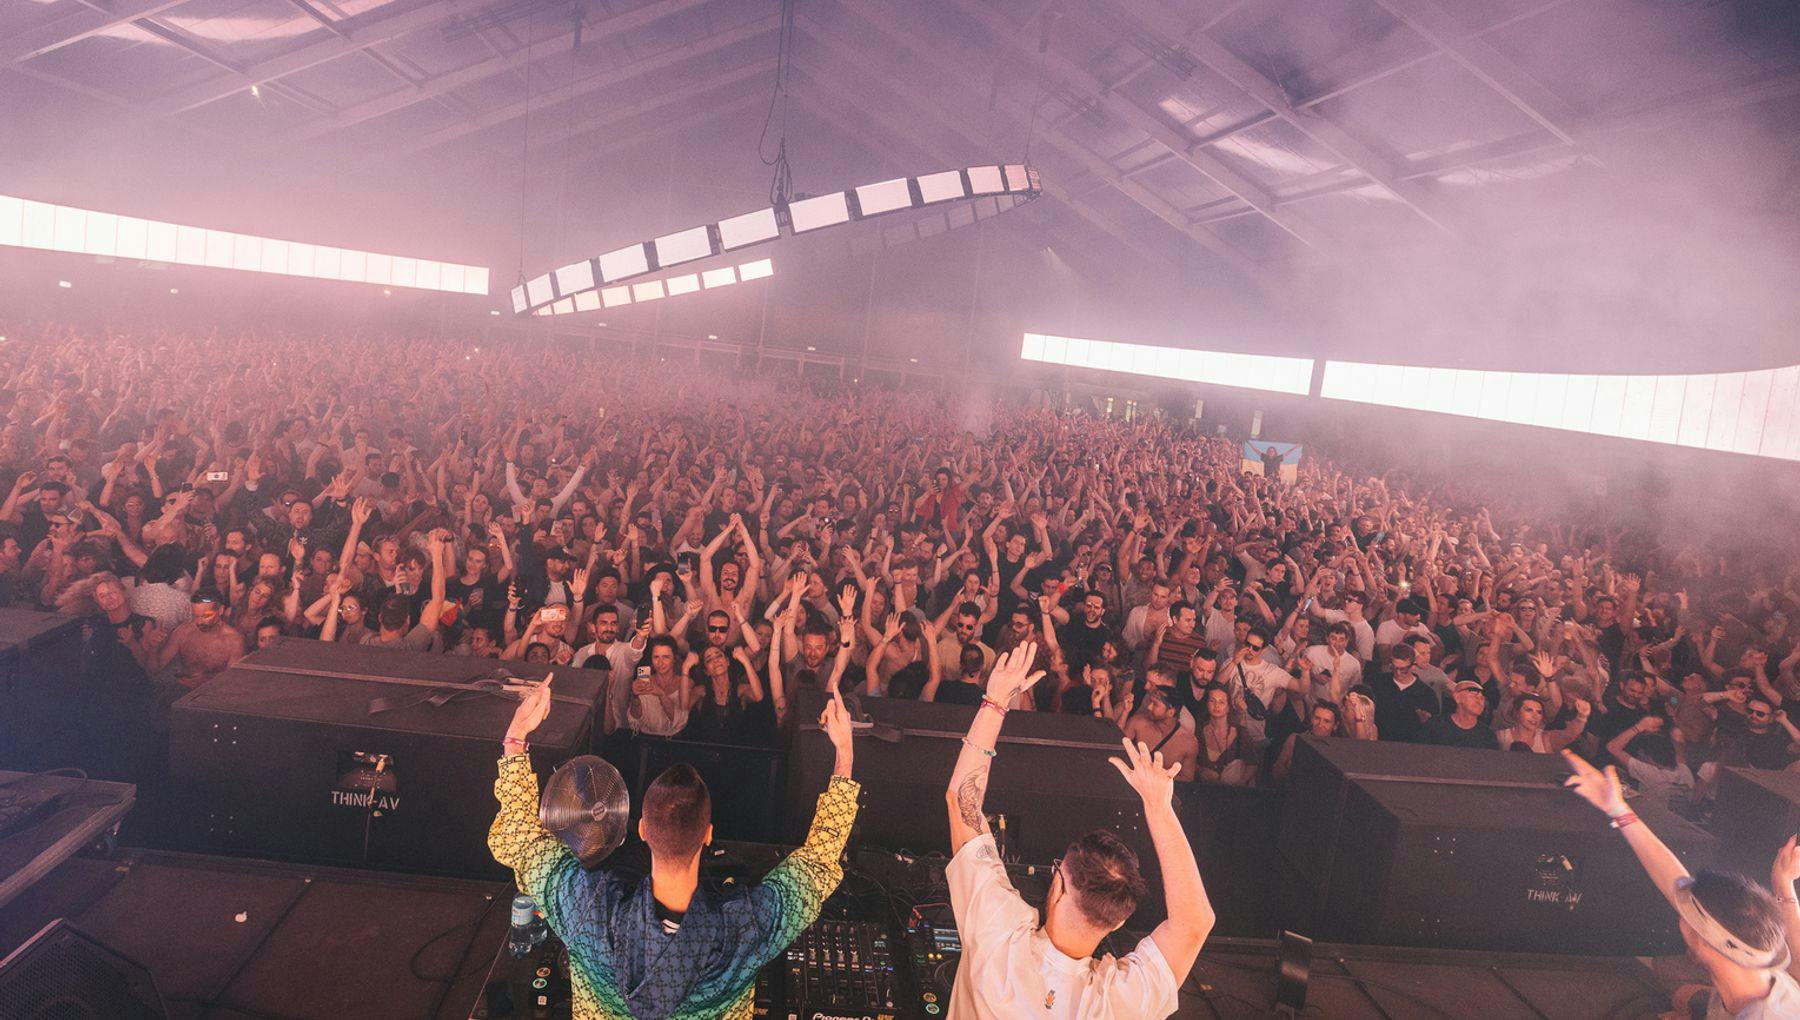 DJ's with their hands in the air during DGTL Festival 2022